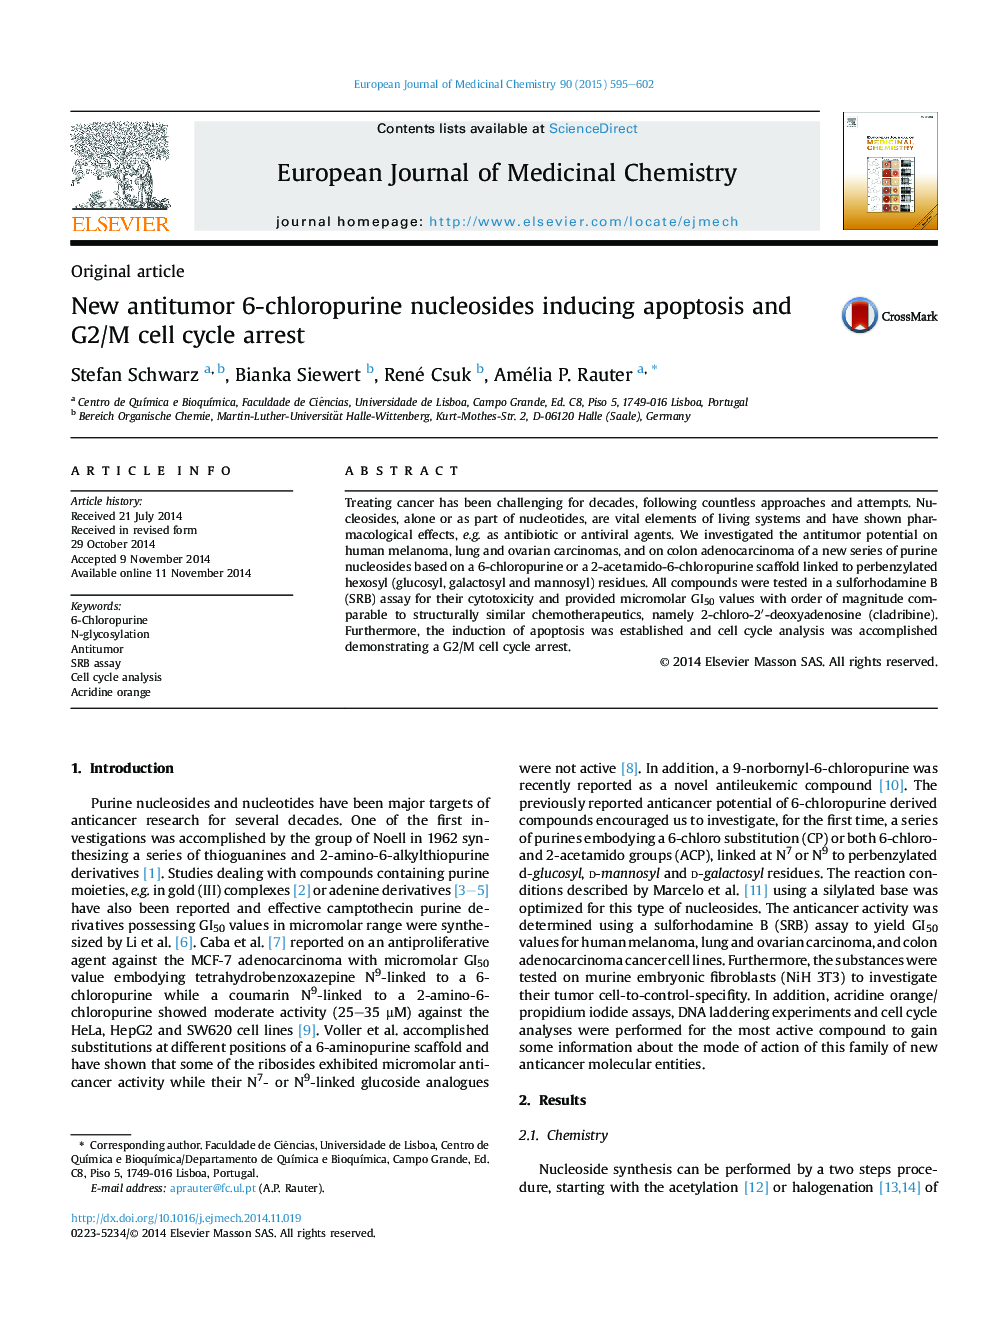 New antitumor 6-chloropurine nucleosides inducing apoptosis and G2/M cell cycle arrest